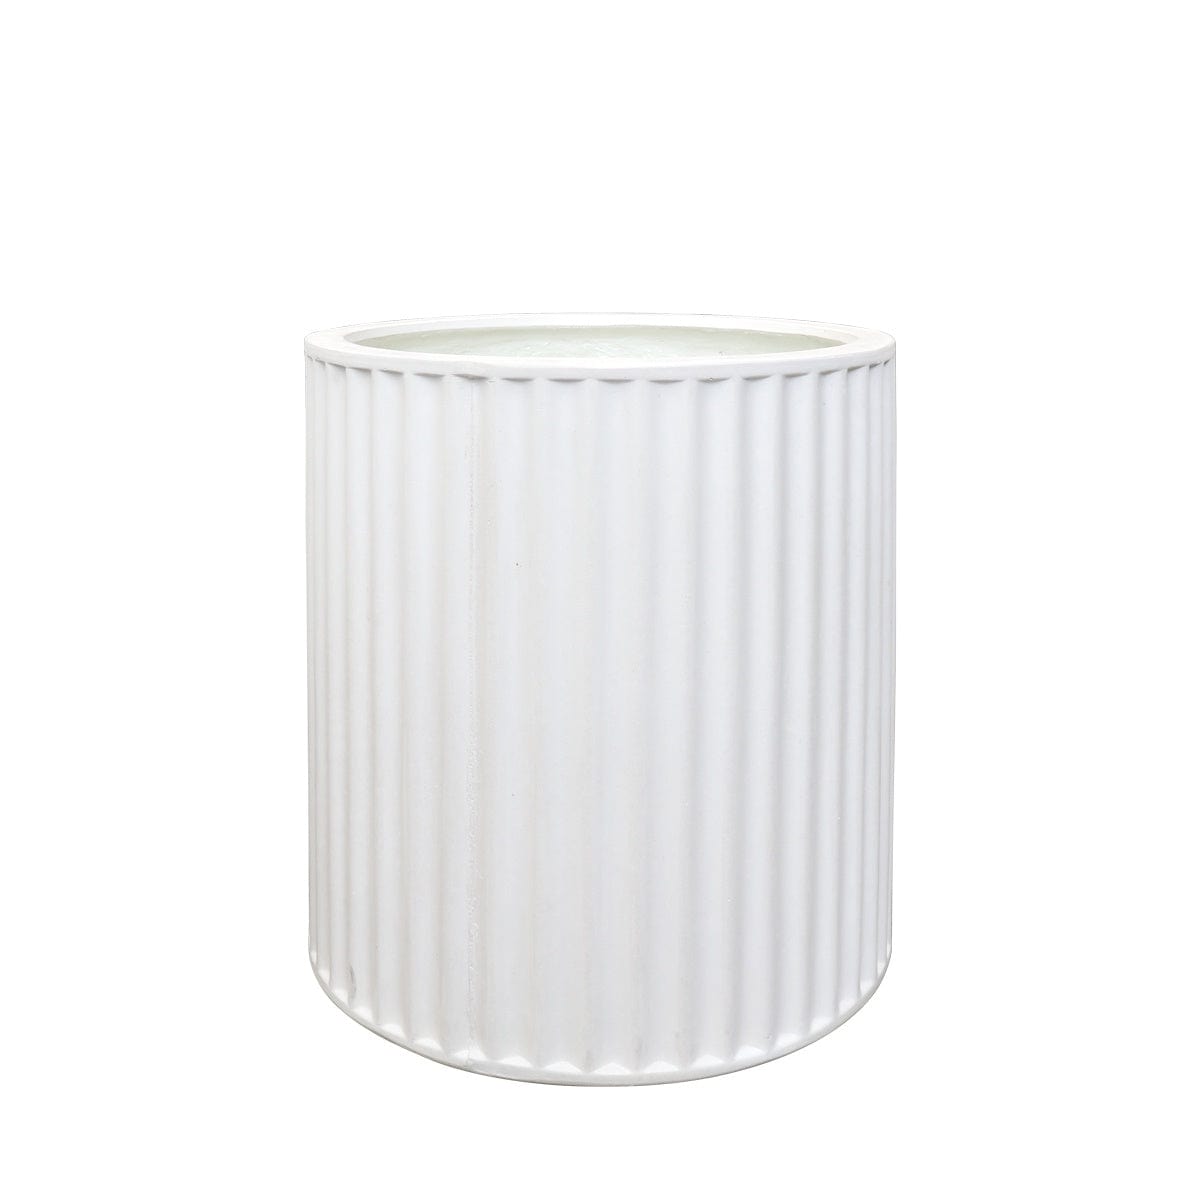 Piako Ribbed Cylinder Planter Small - White PRE ORDER